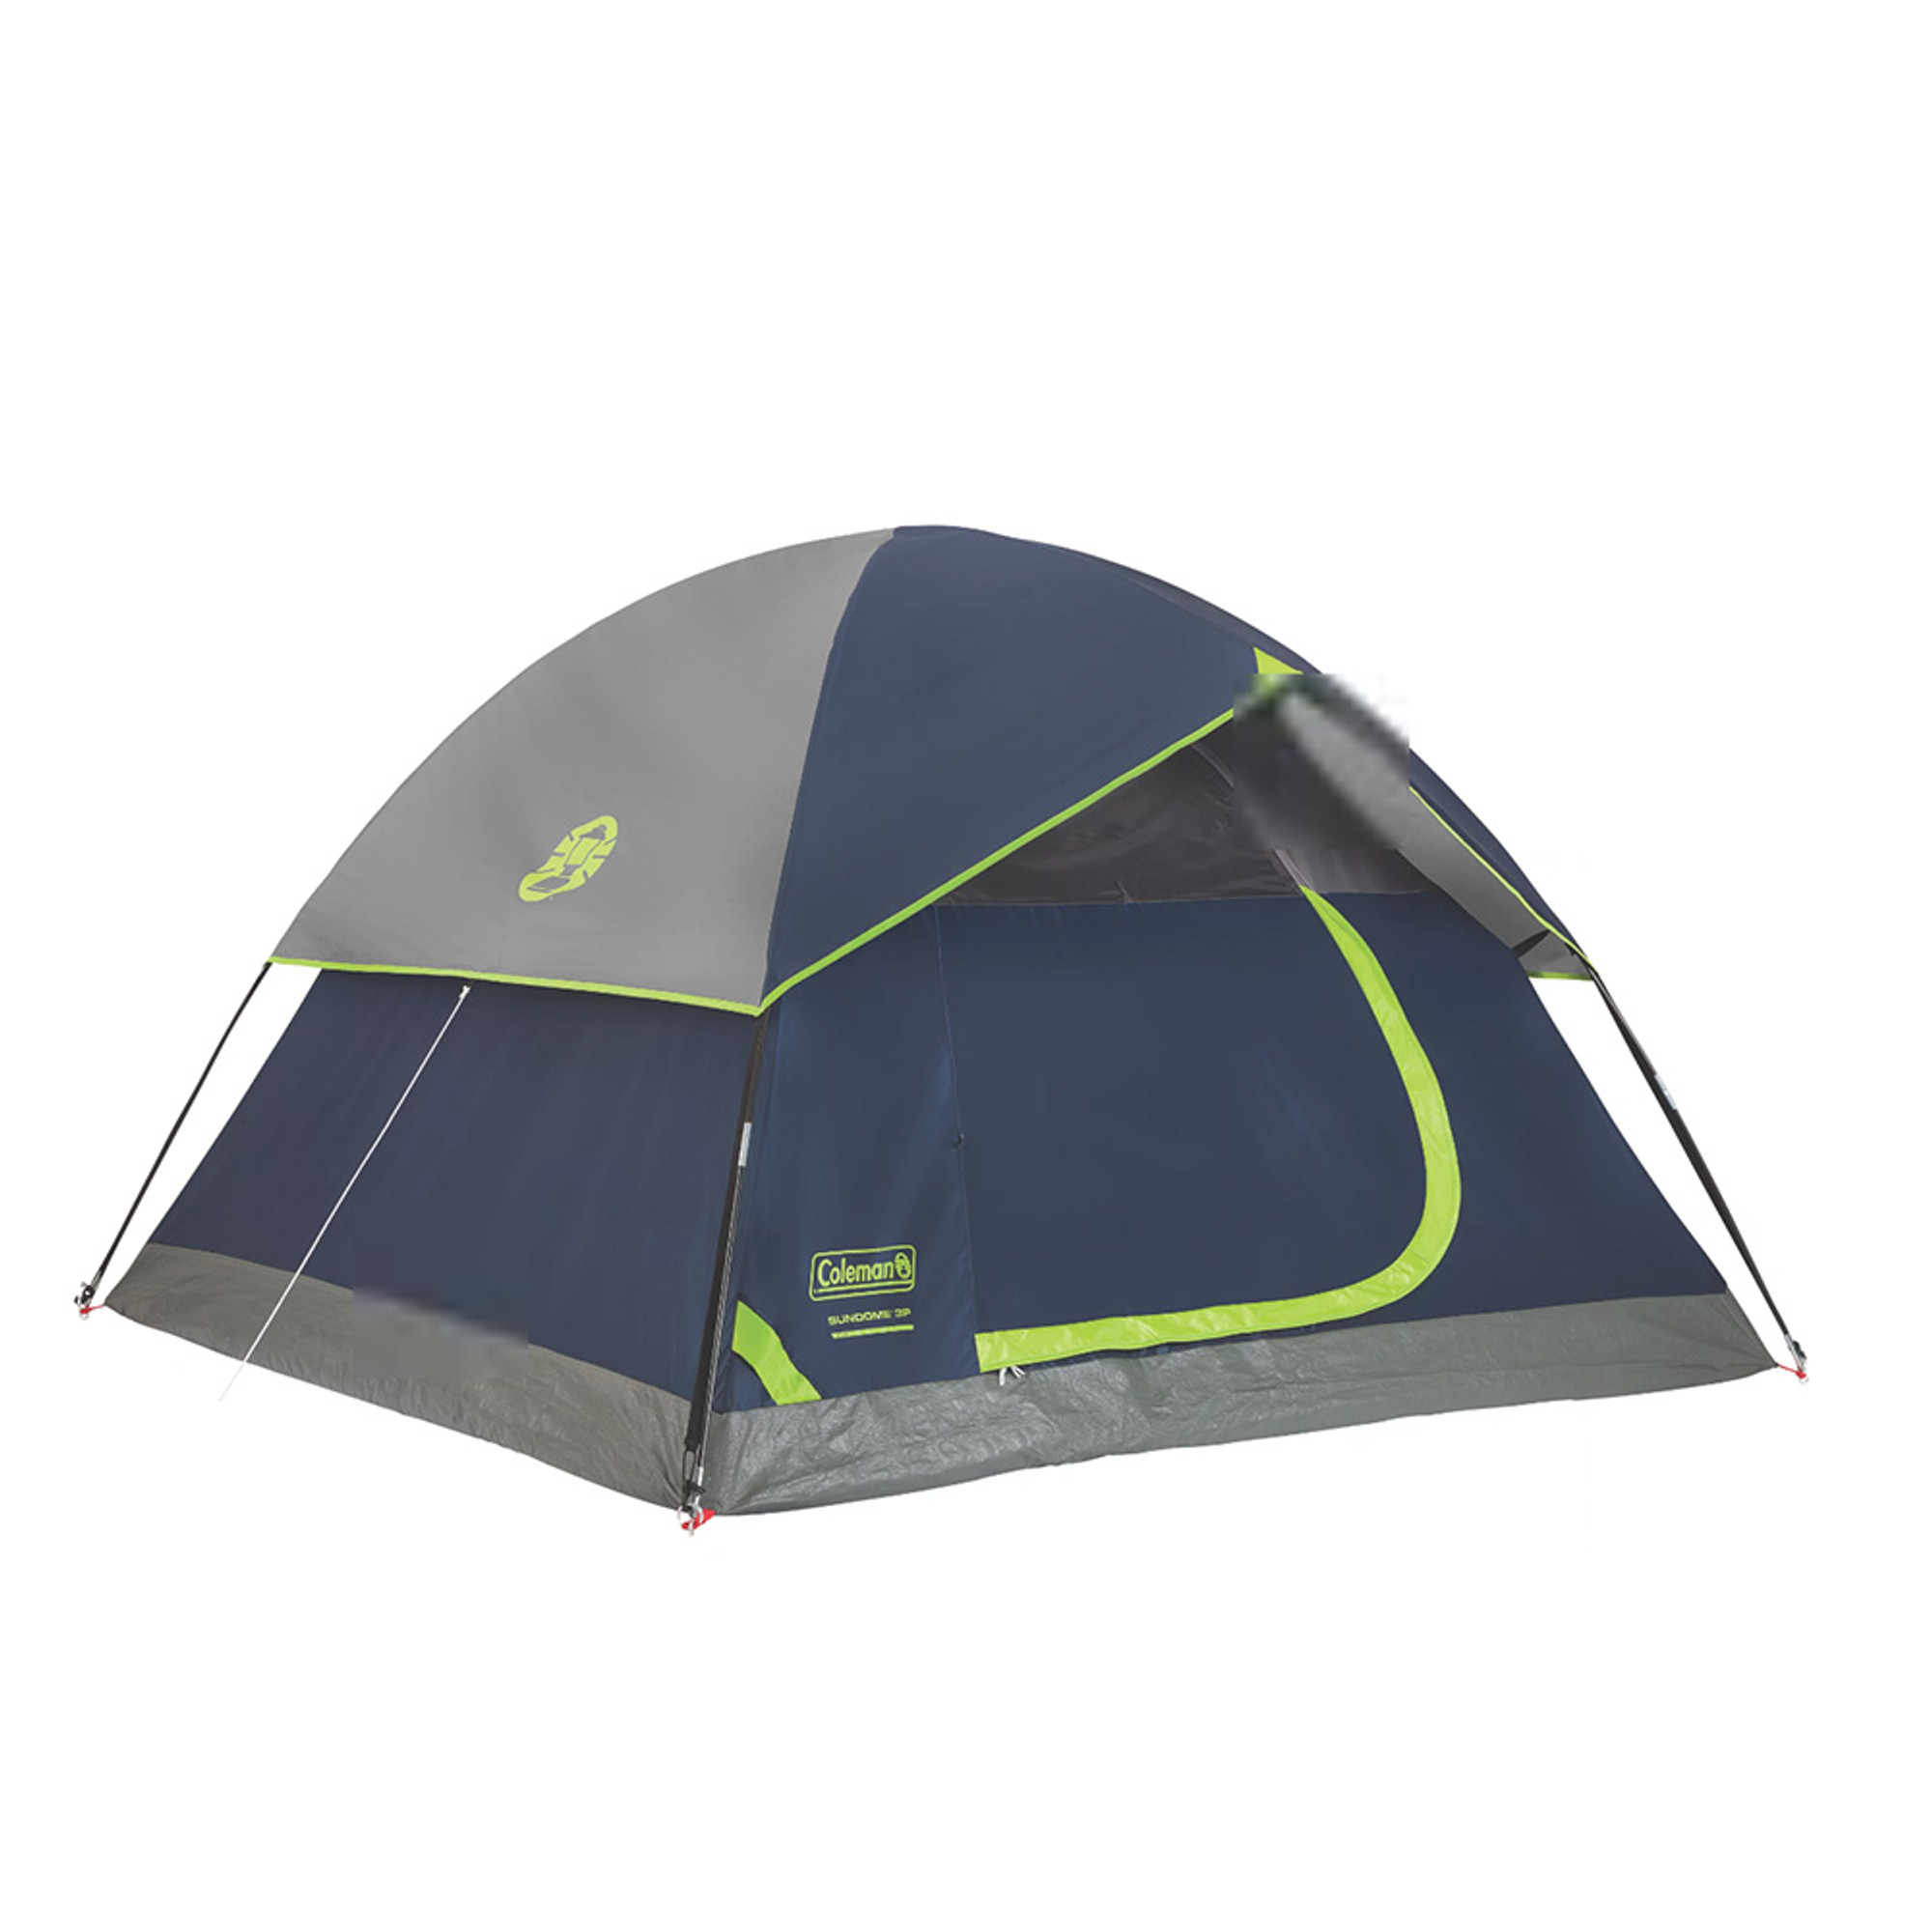 Coleman Sundome 2-Person Camping Tent - Navy Blue & Grey